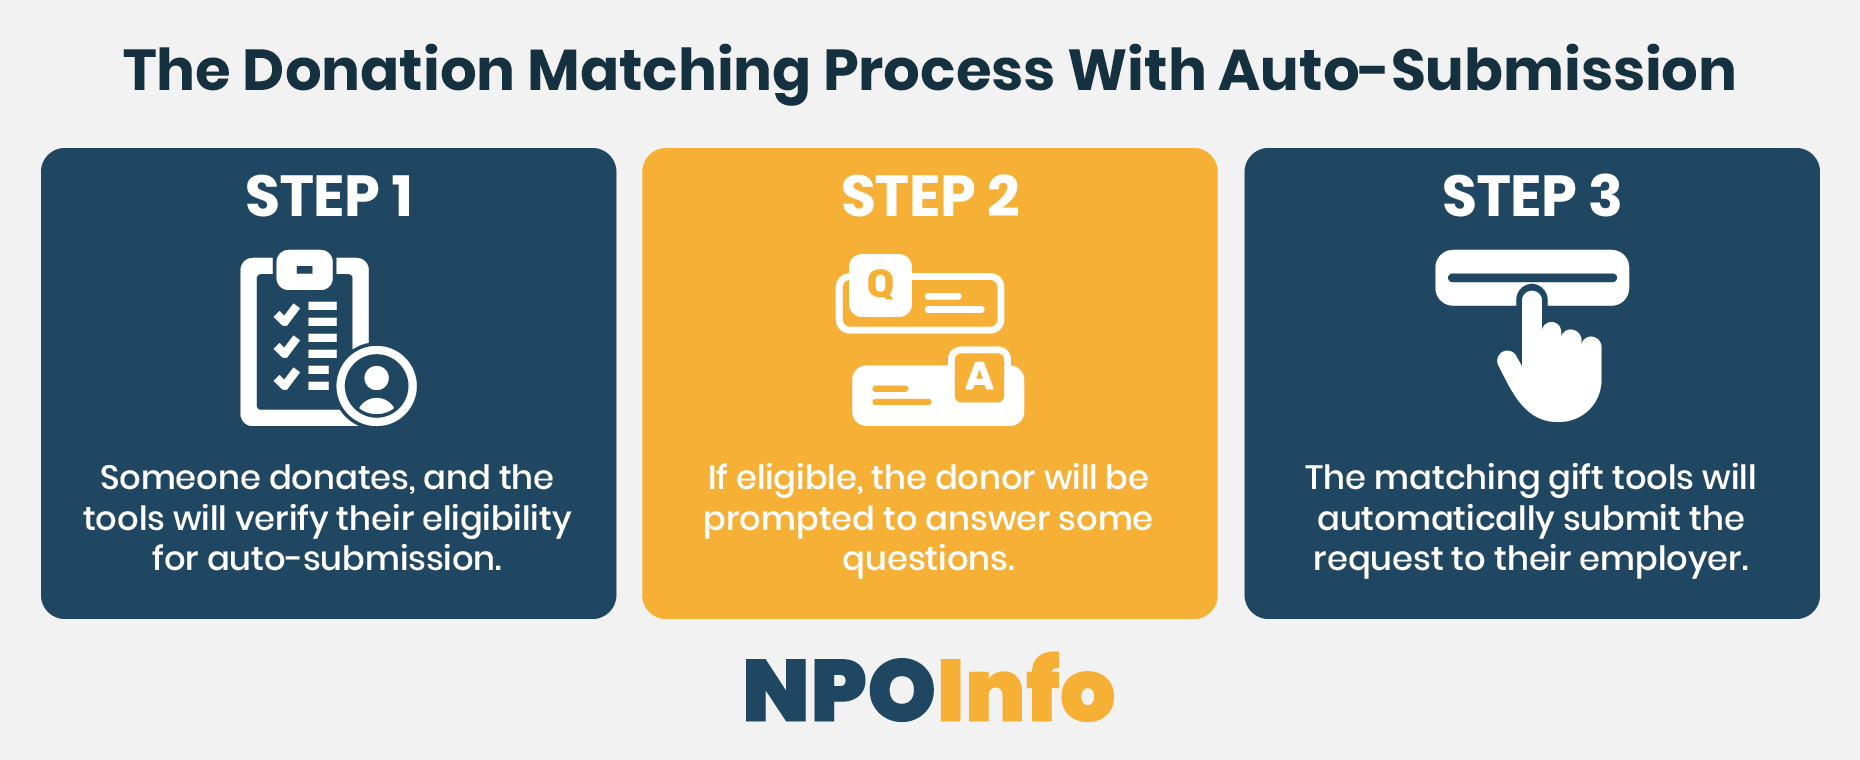 Auto-submission cuts down the matching gift process into three easy steps.